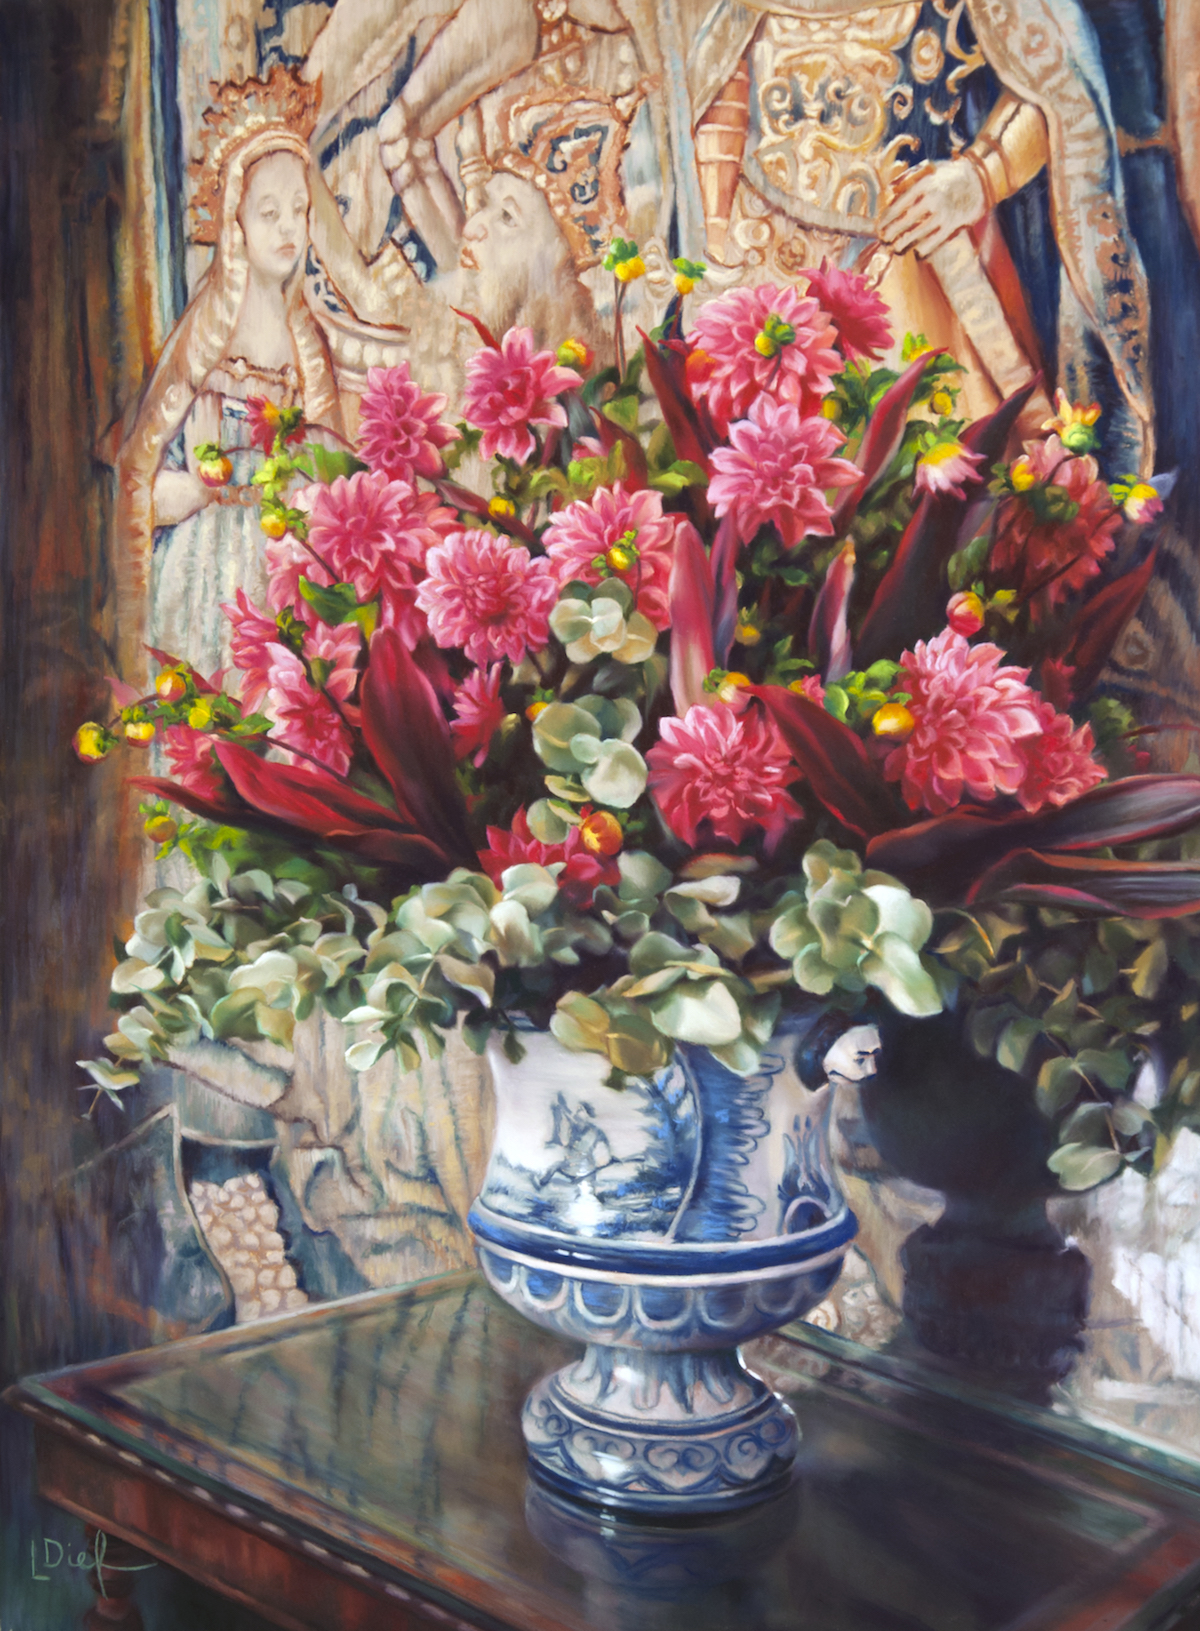 Lyn Diefenbach, "In the Light of History," Jan 2017, Pastel on Fisher 400, 24 x 18 in. Sold. Various trips across France and the UK gave me inspiration to include mediaeval tapestries as a backdrop for still life.